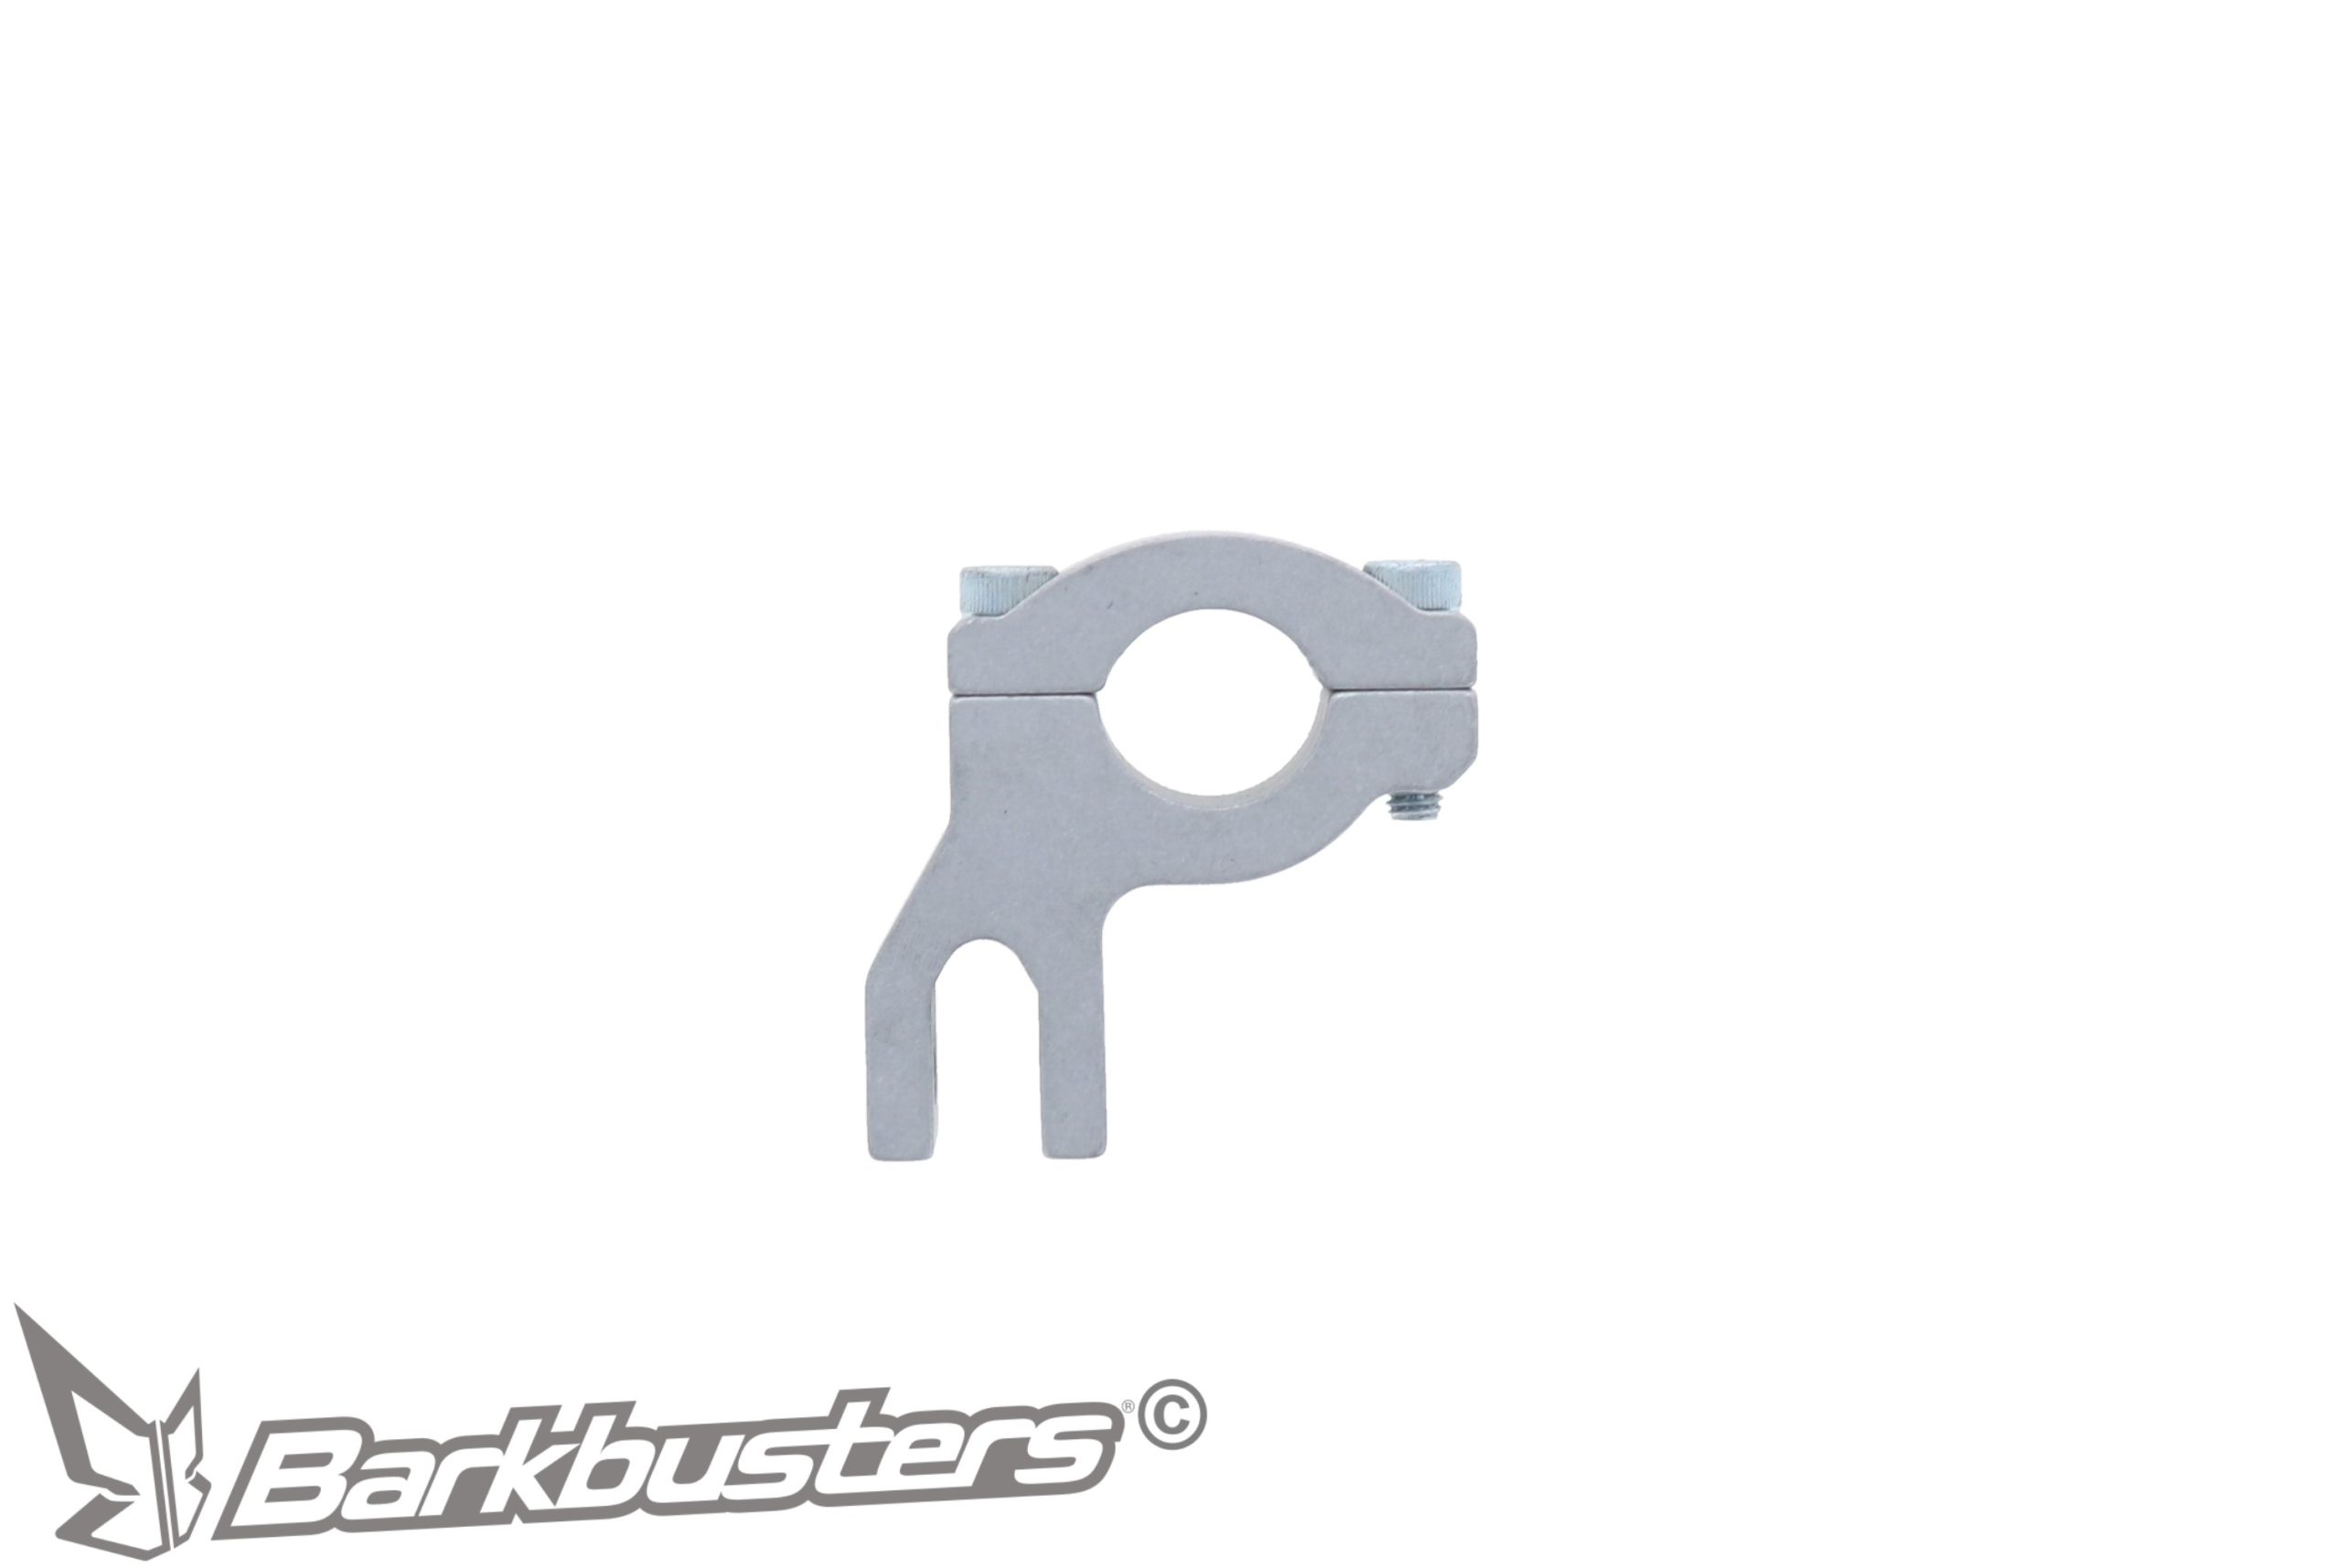 BARKBUSTERS Replacement Part - (Code: R-MFC-22) 